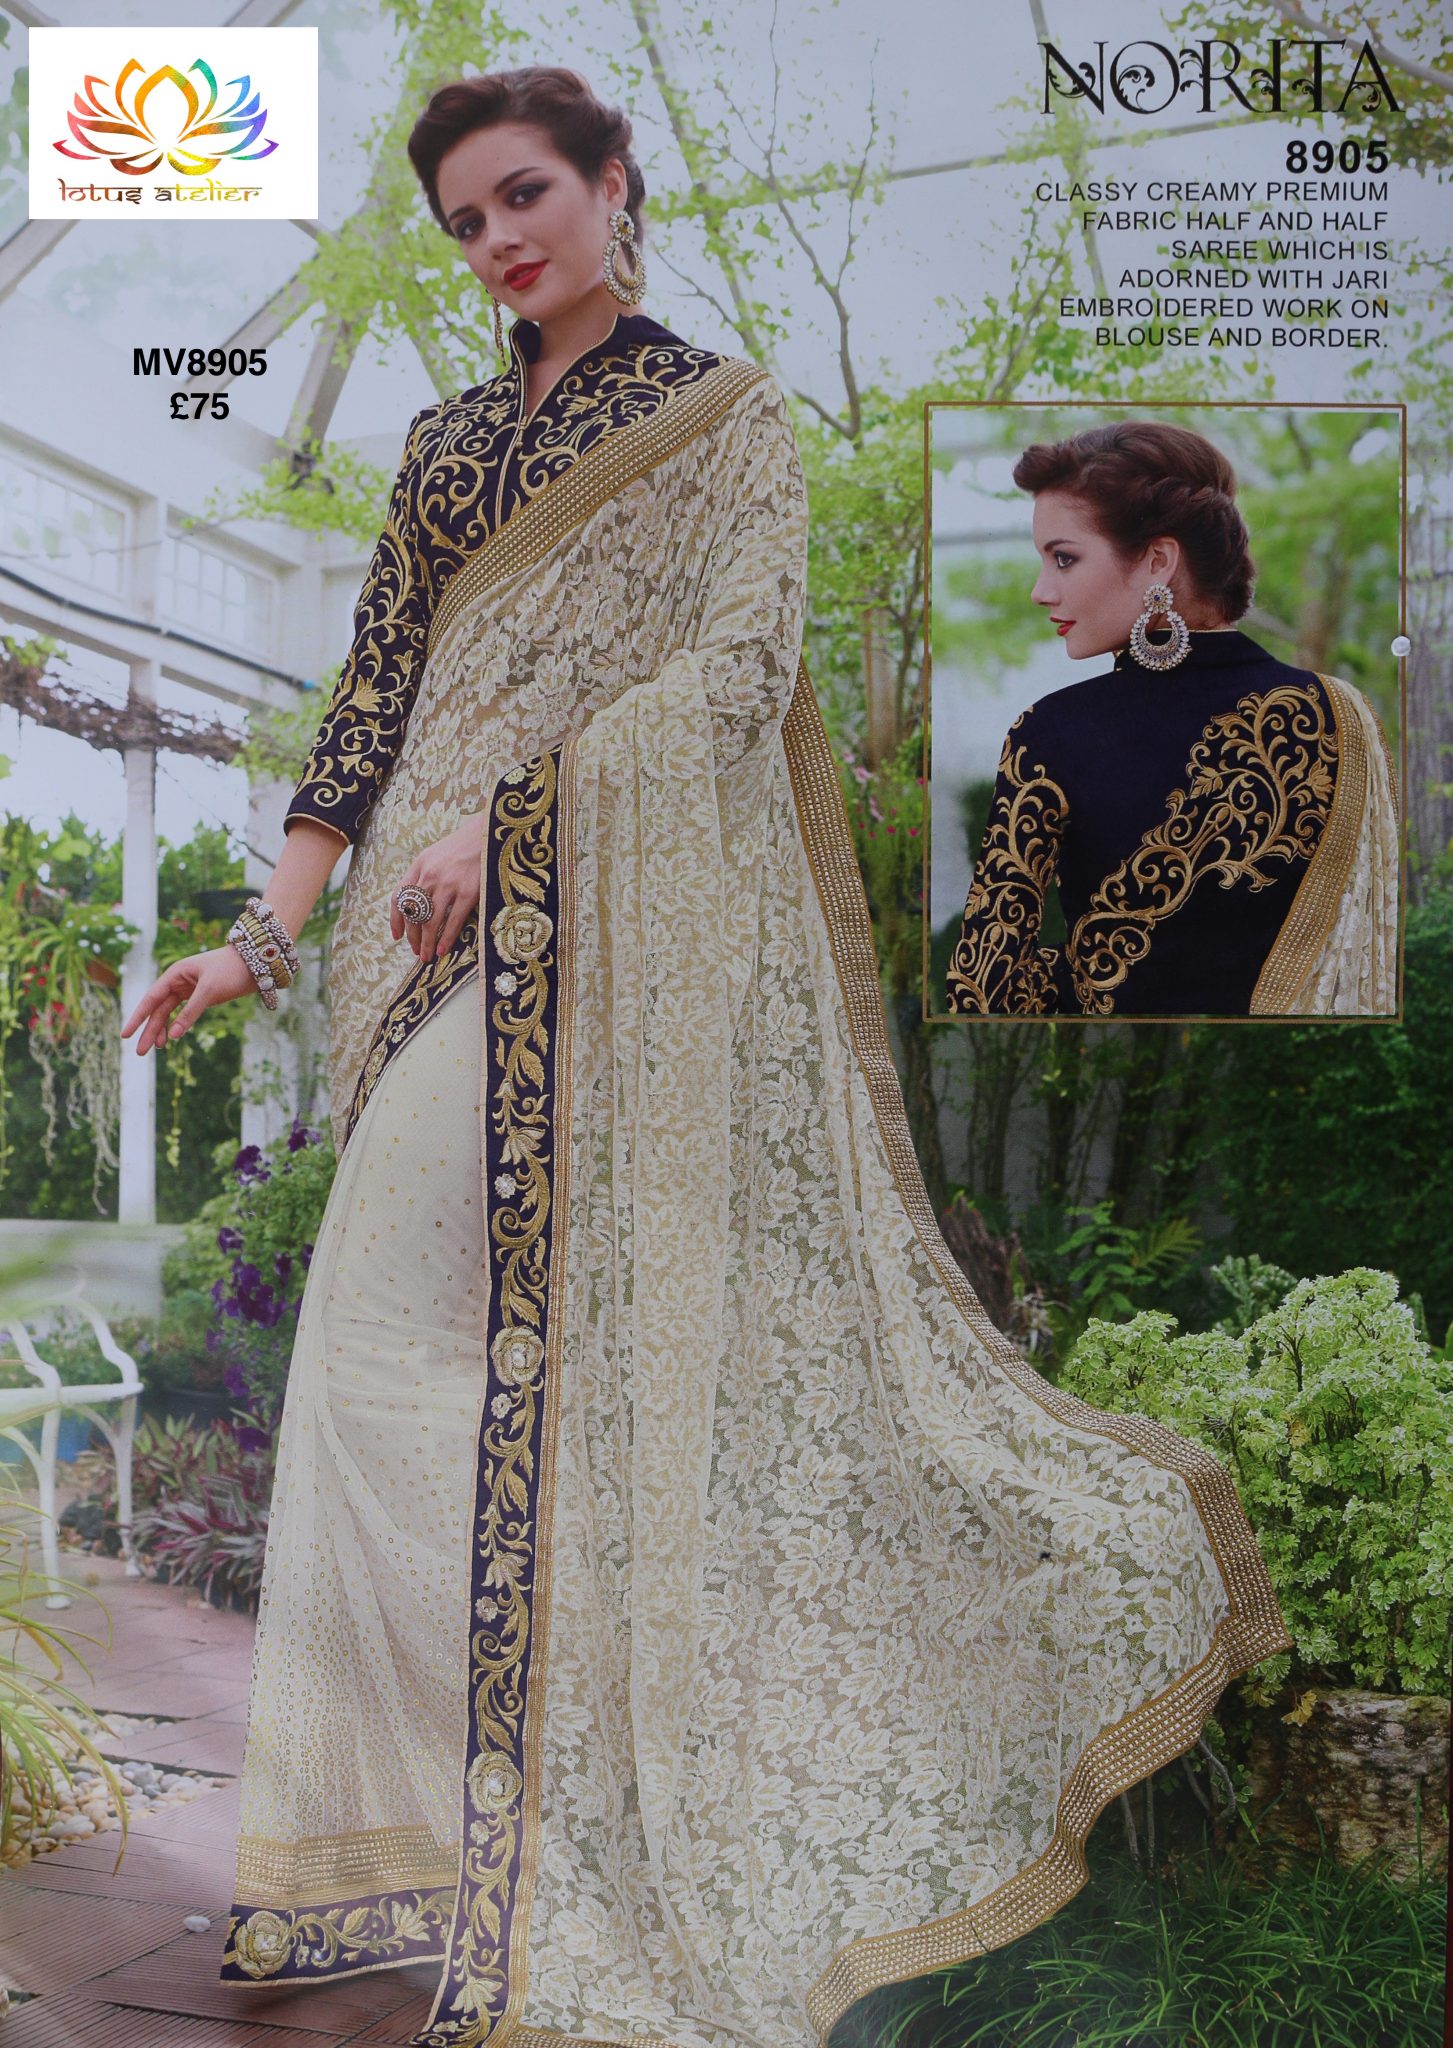 Asim Jofa - A classic black chantilly lace saree by Asim Jofa. View  details: http://www.asimjofa.com/aj-375 Black Chantilly lace saree with  heavy embellished embroidered borders with sequin spray sprinkled all over  the sari